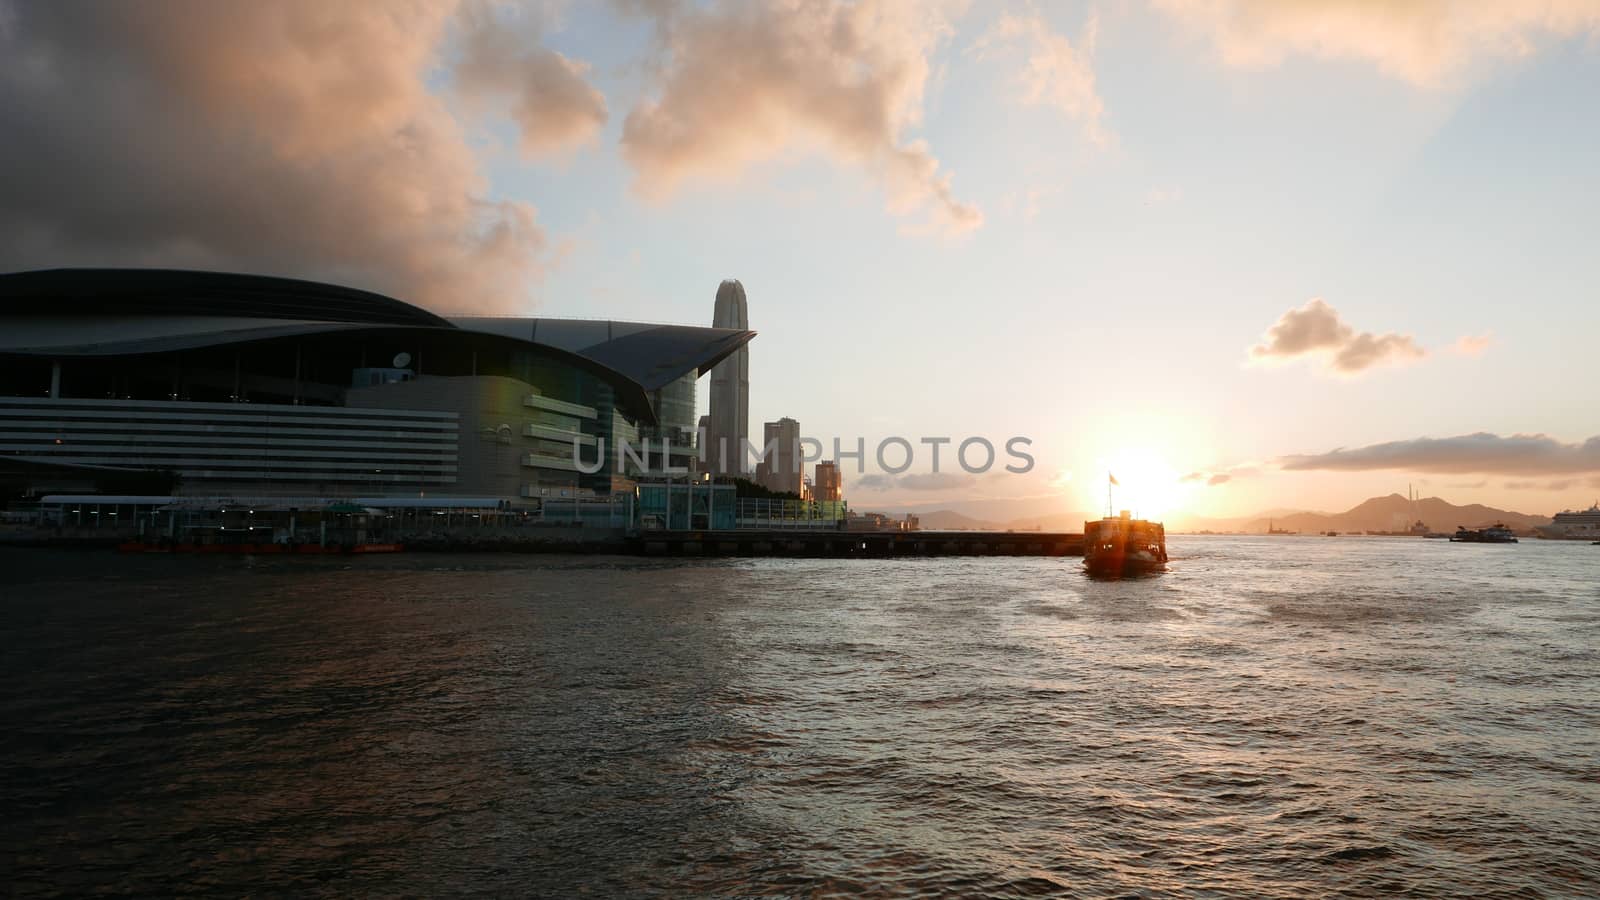 Hong Kong Victoria River, ferry and buildings at sunset